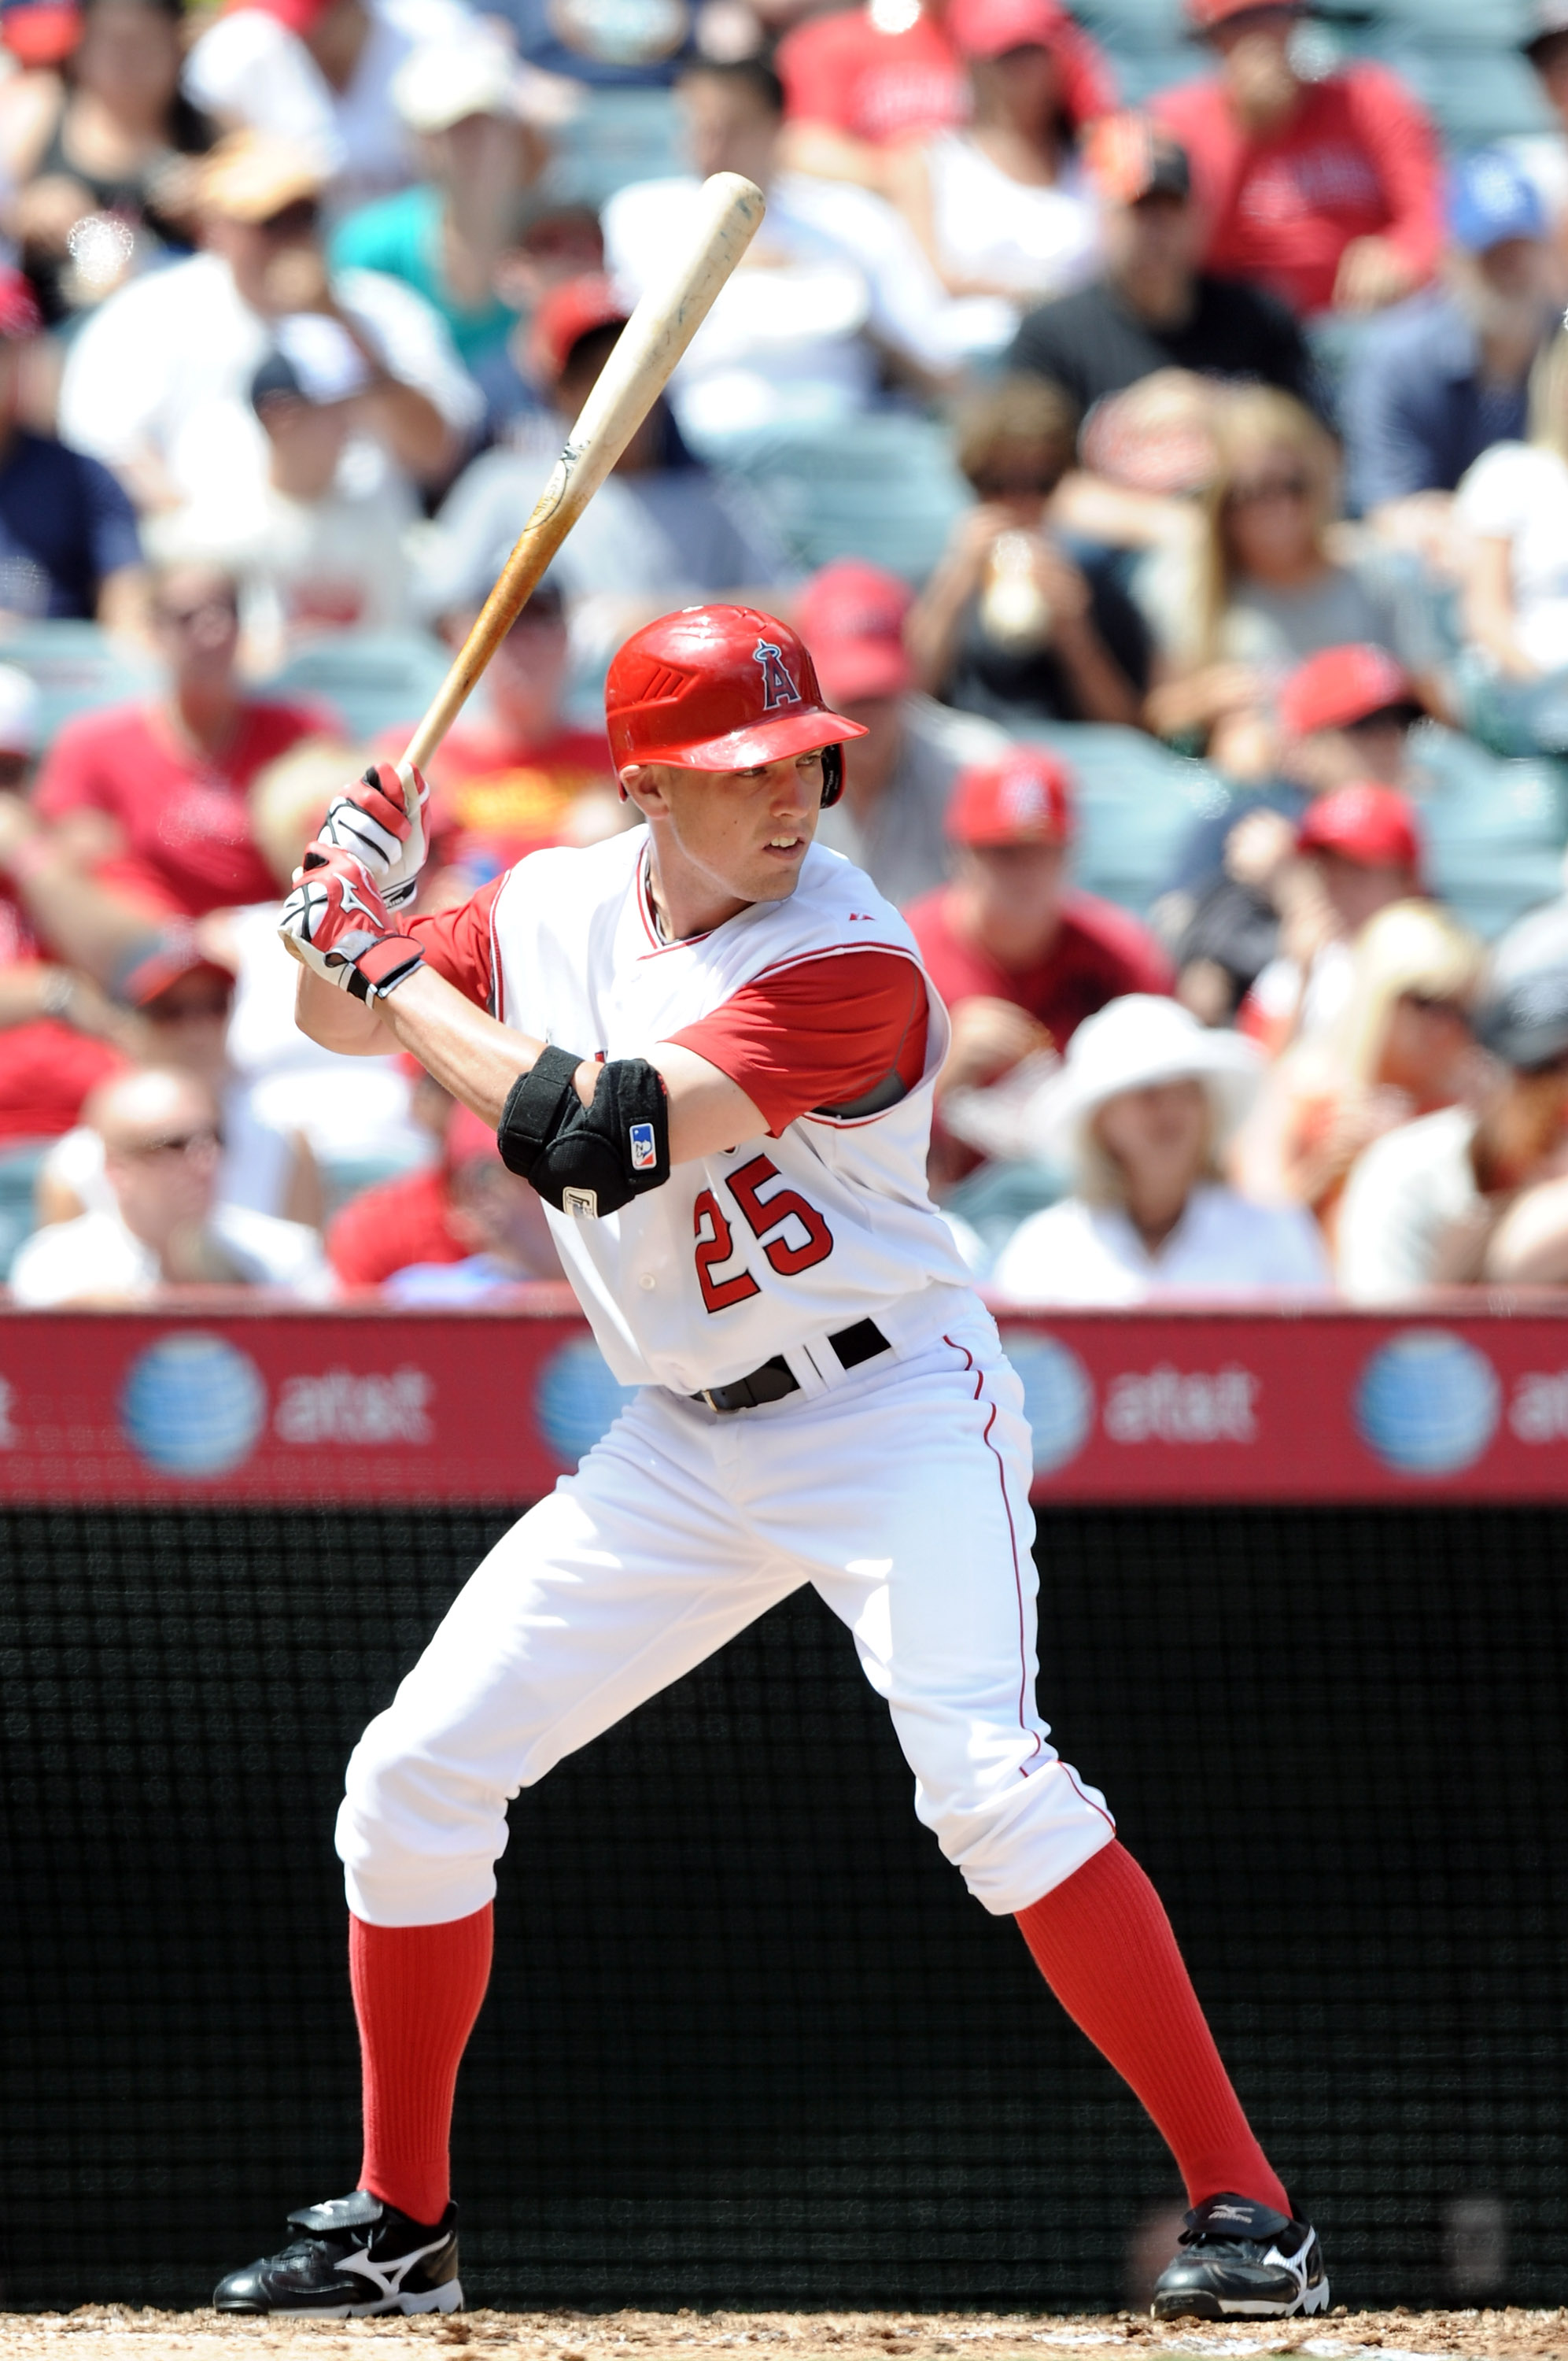 ANAHEIM, CA - AUGUST 29:  Peter Bourjos #25 of the Los Angeles Angels of Anaheim at bat against the Baltimore Orioles at Angel Stadium on August 29, 2010 in Anaheim, California.  (Photo by Harry How/Getty Images)